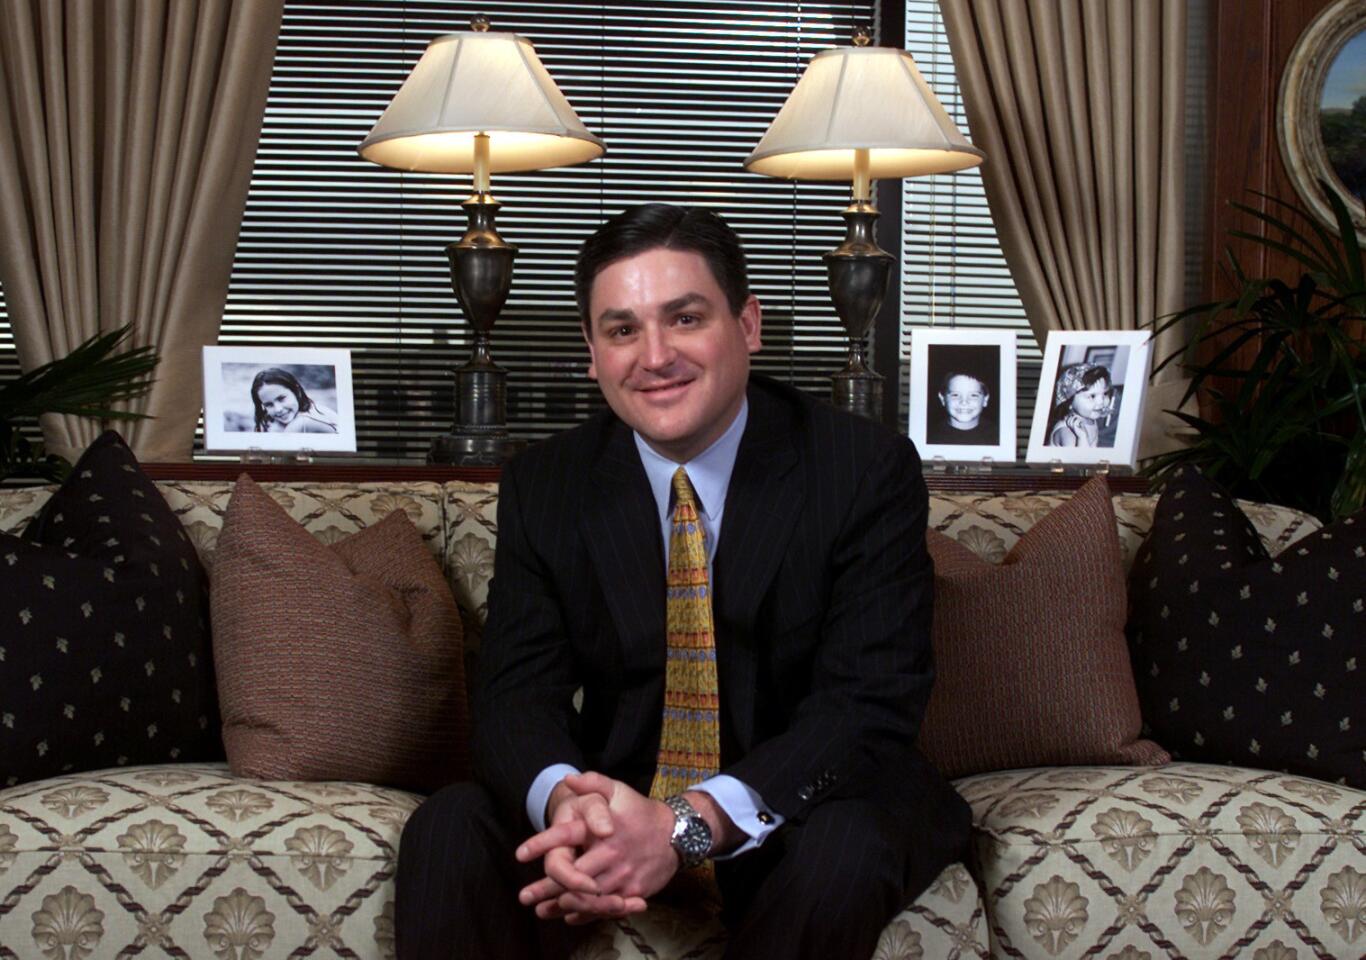 Michael Perry, 50, former CEO, IndyMac Bancorp